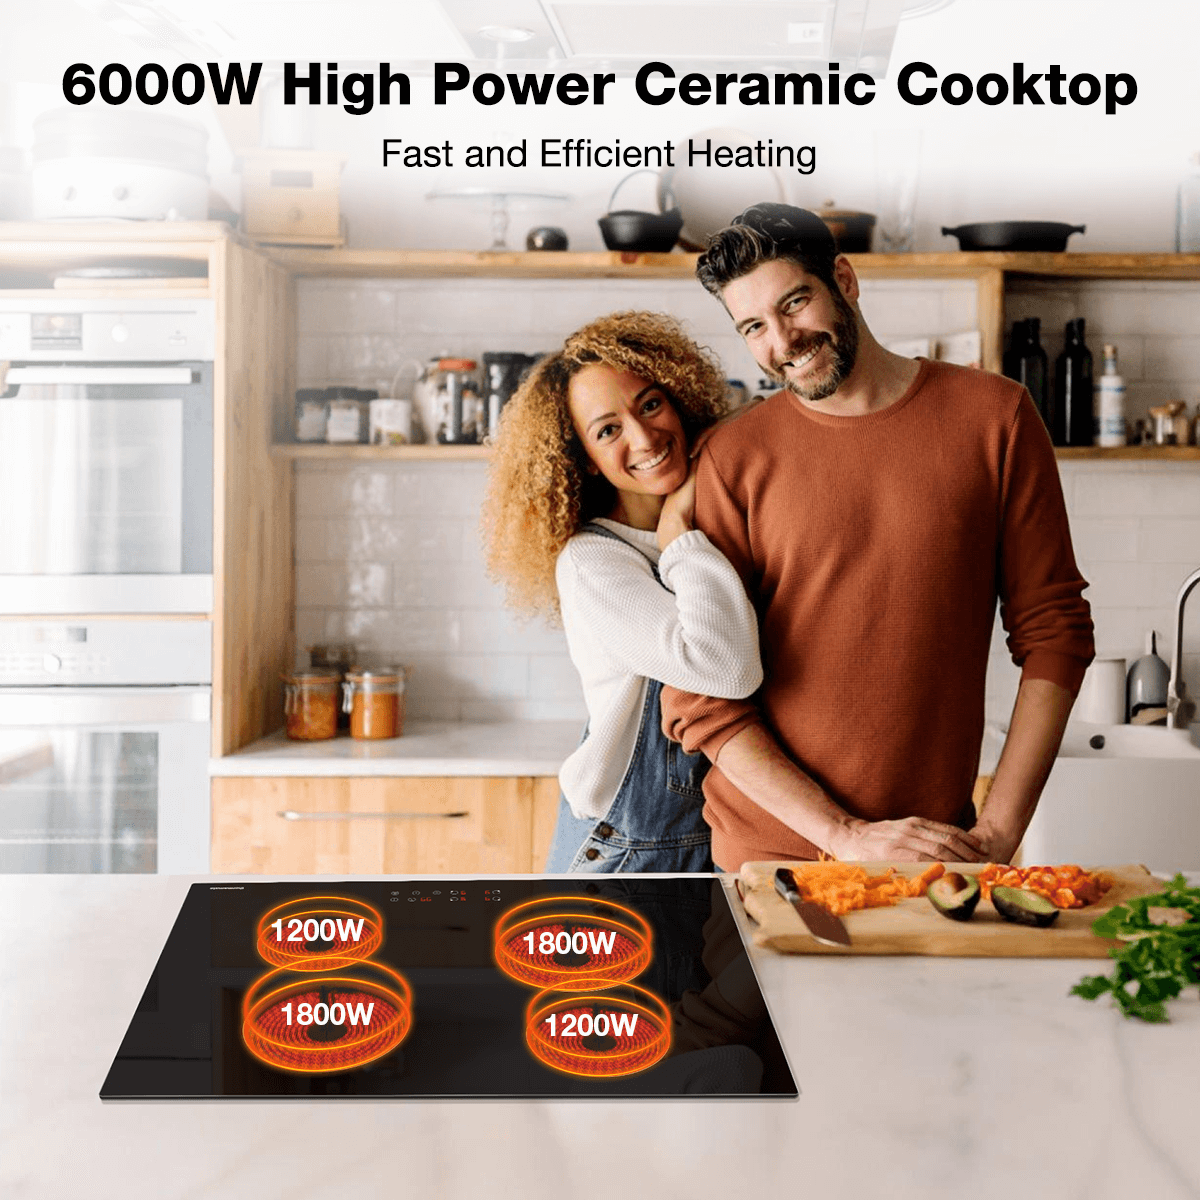 6000W High Power Ceramic Cooktop | Thermomate